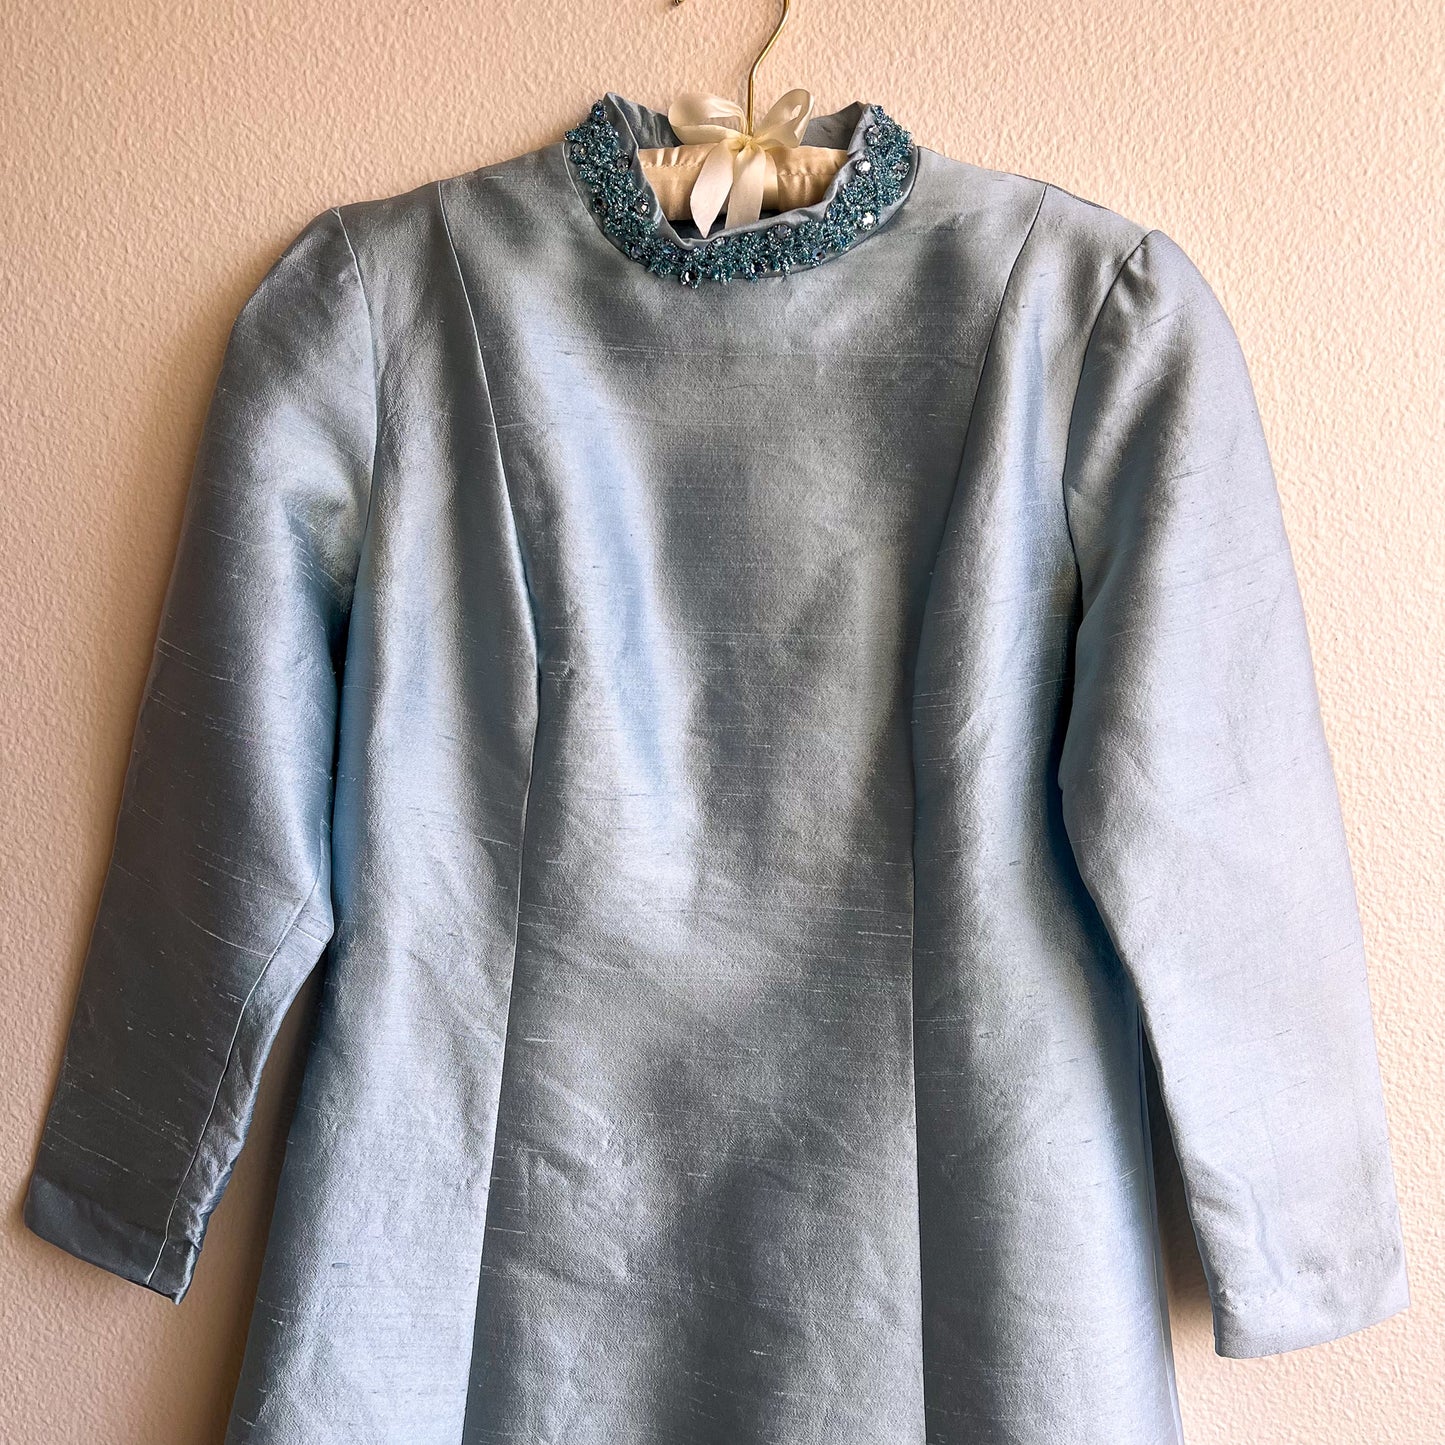 1960s Icy Blue Long Sleeve Silk Party Dress (M/L)